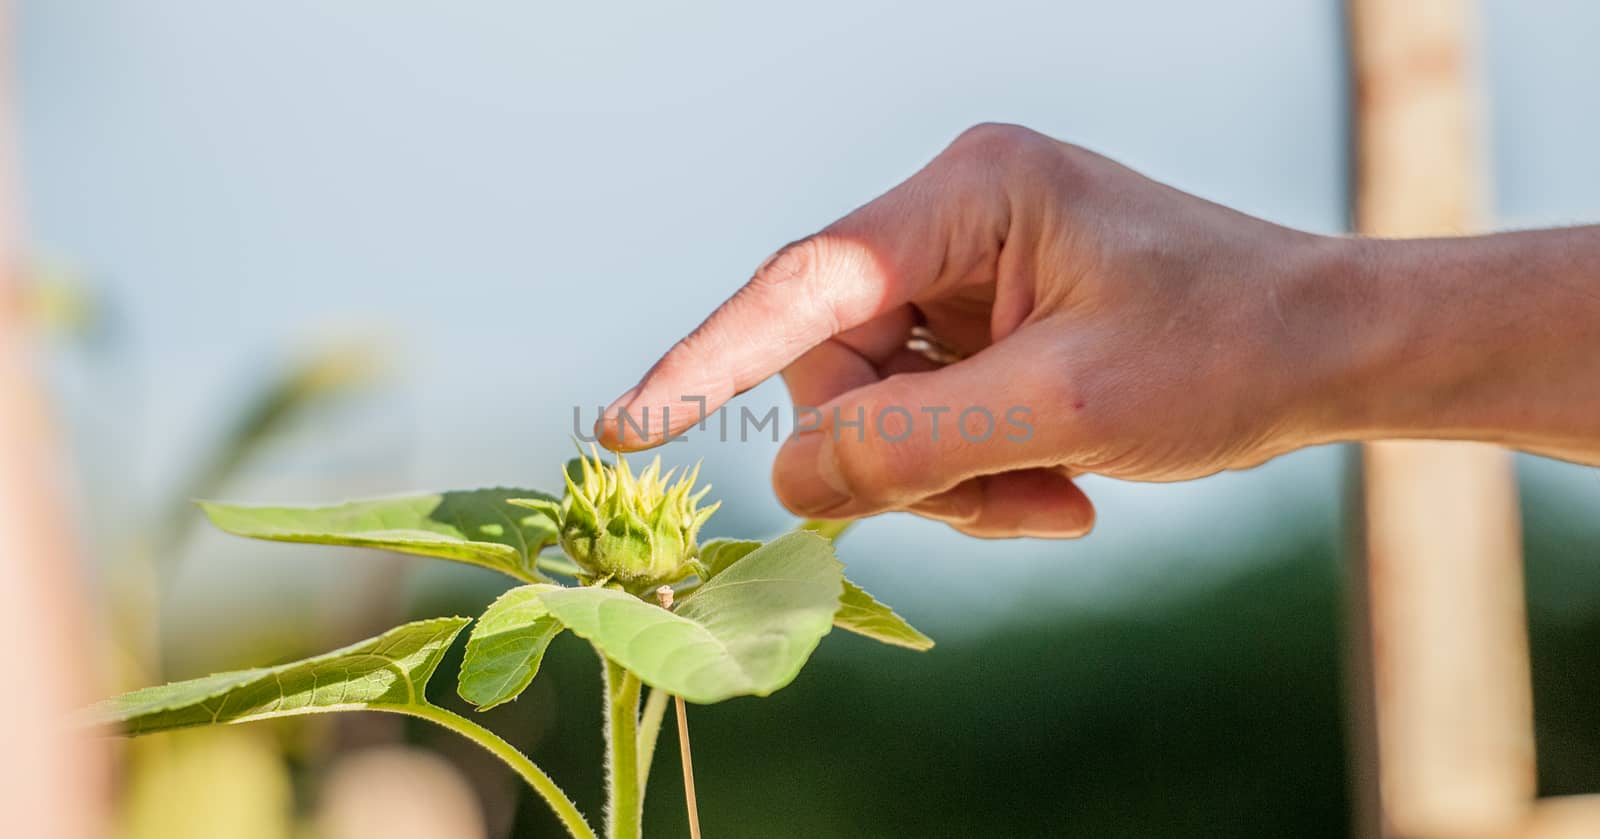 a growing sunflower getting a hand by sirspread